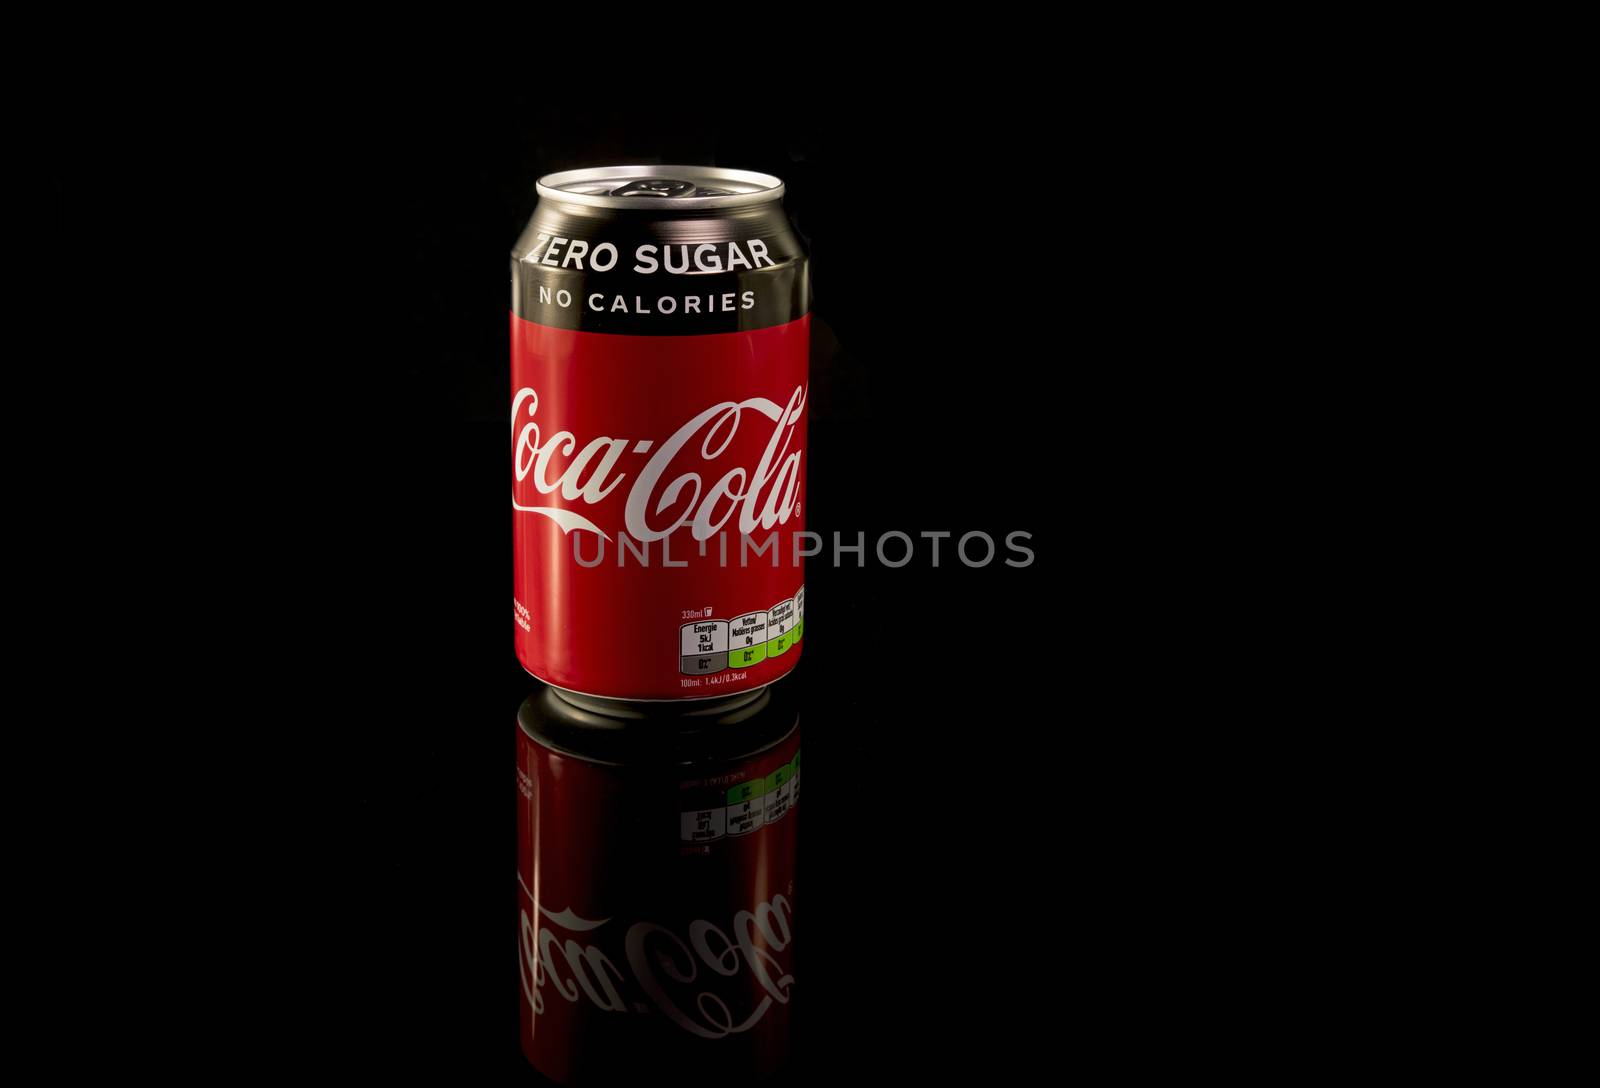 Amsterdam,28-12-2019: Coca-Cola Zero can 330 ml , no sugar, produced by The Coca-Cola Company isolated on black background, It's popular soft drink soda sold in vending machines and general store.